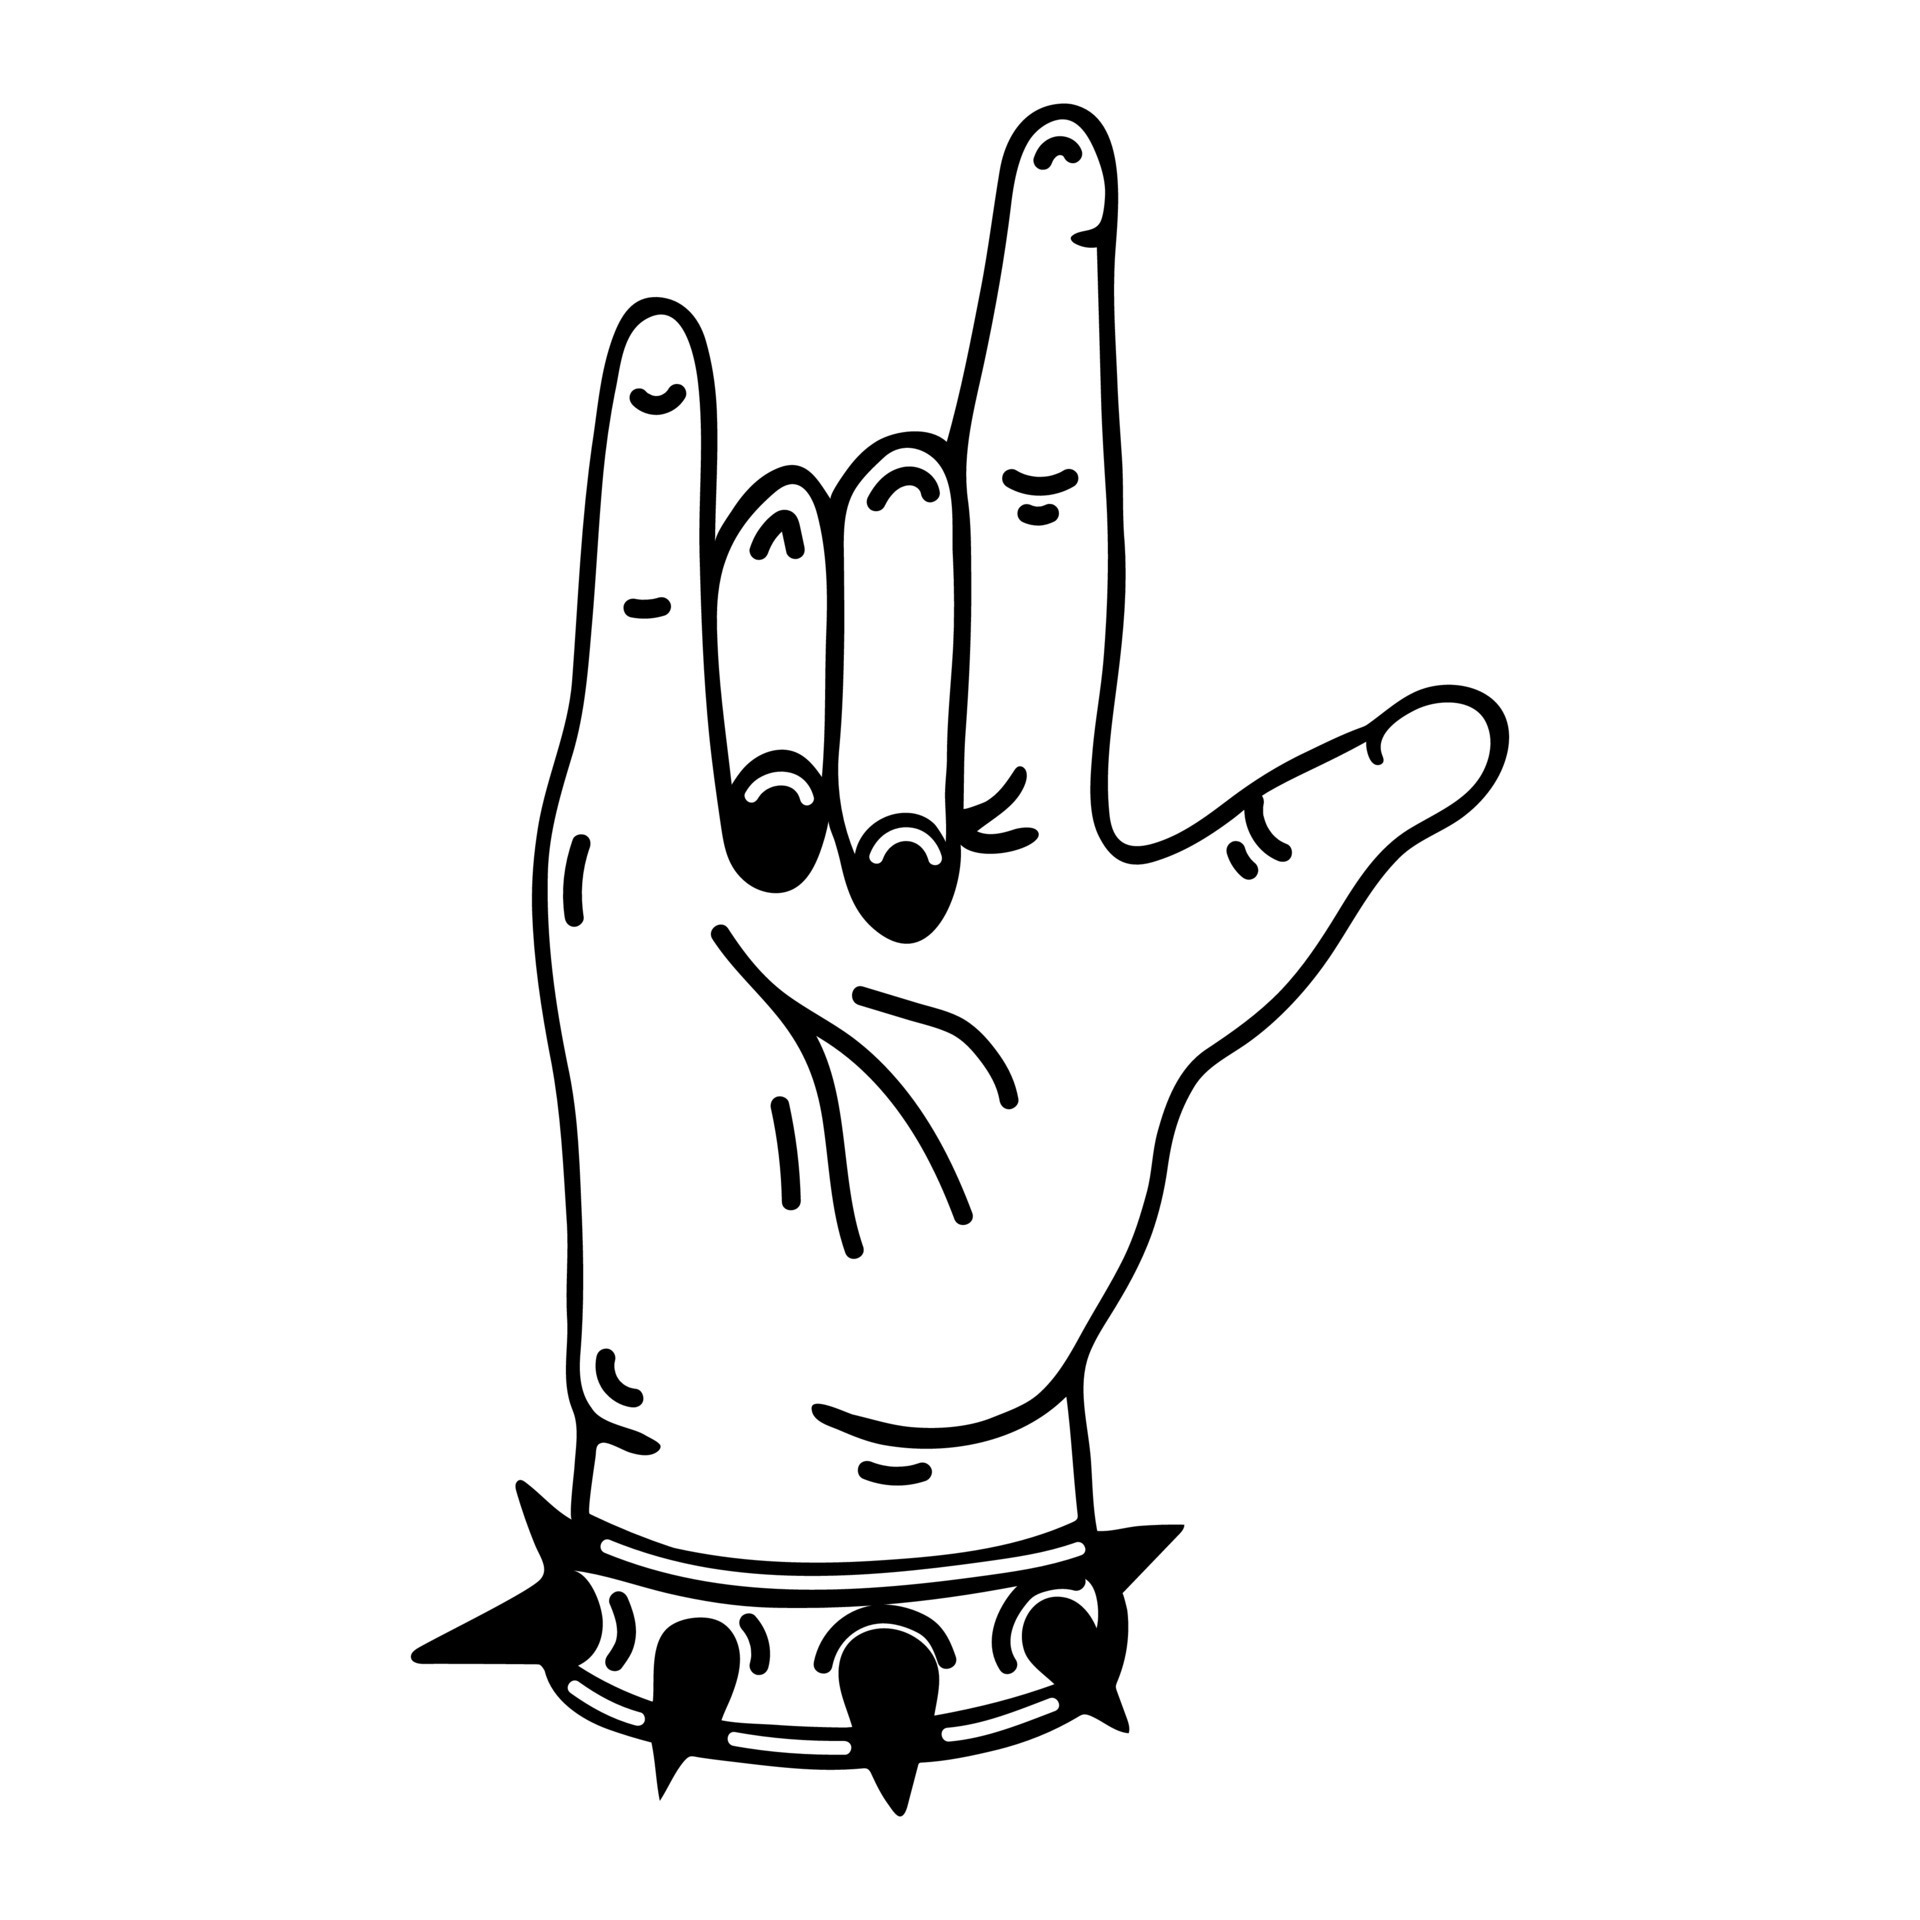 Rock hand sign. Simple vector icon. Hand drawn doodle isolated on white.  Female arm with painted nails, spiked bracelet. Heavy metal music gesture.  Black outline, sketch. Clipart for logo, posters 16516459 Vector